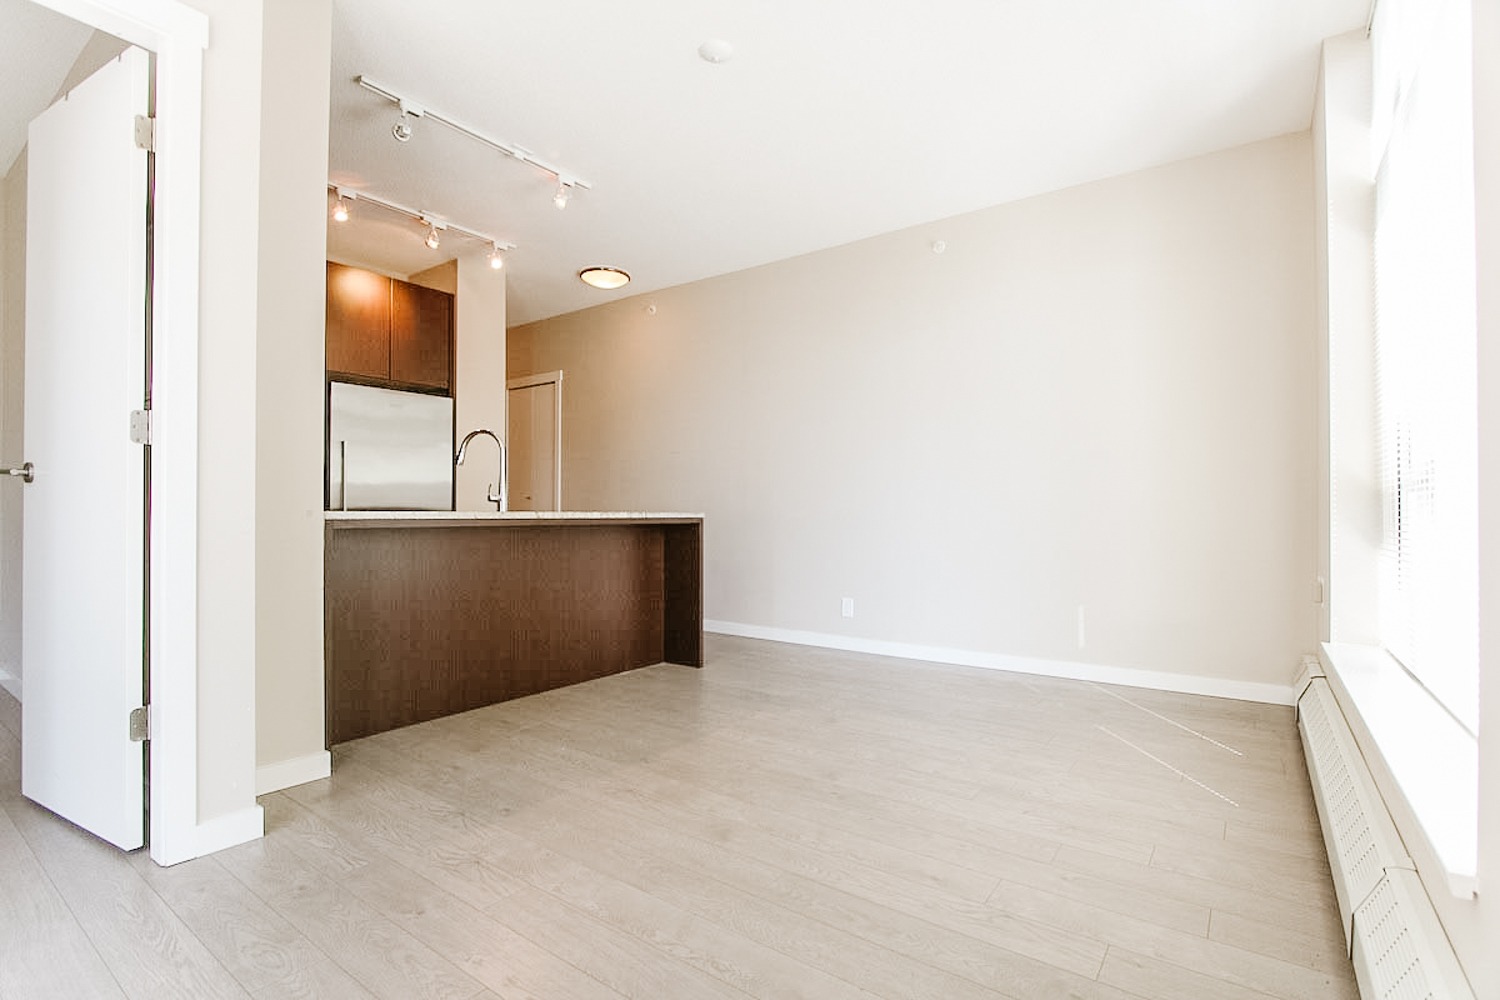 one-bedroom-condo-for-rent-in-lower-lonsdale-north-vancouver-9